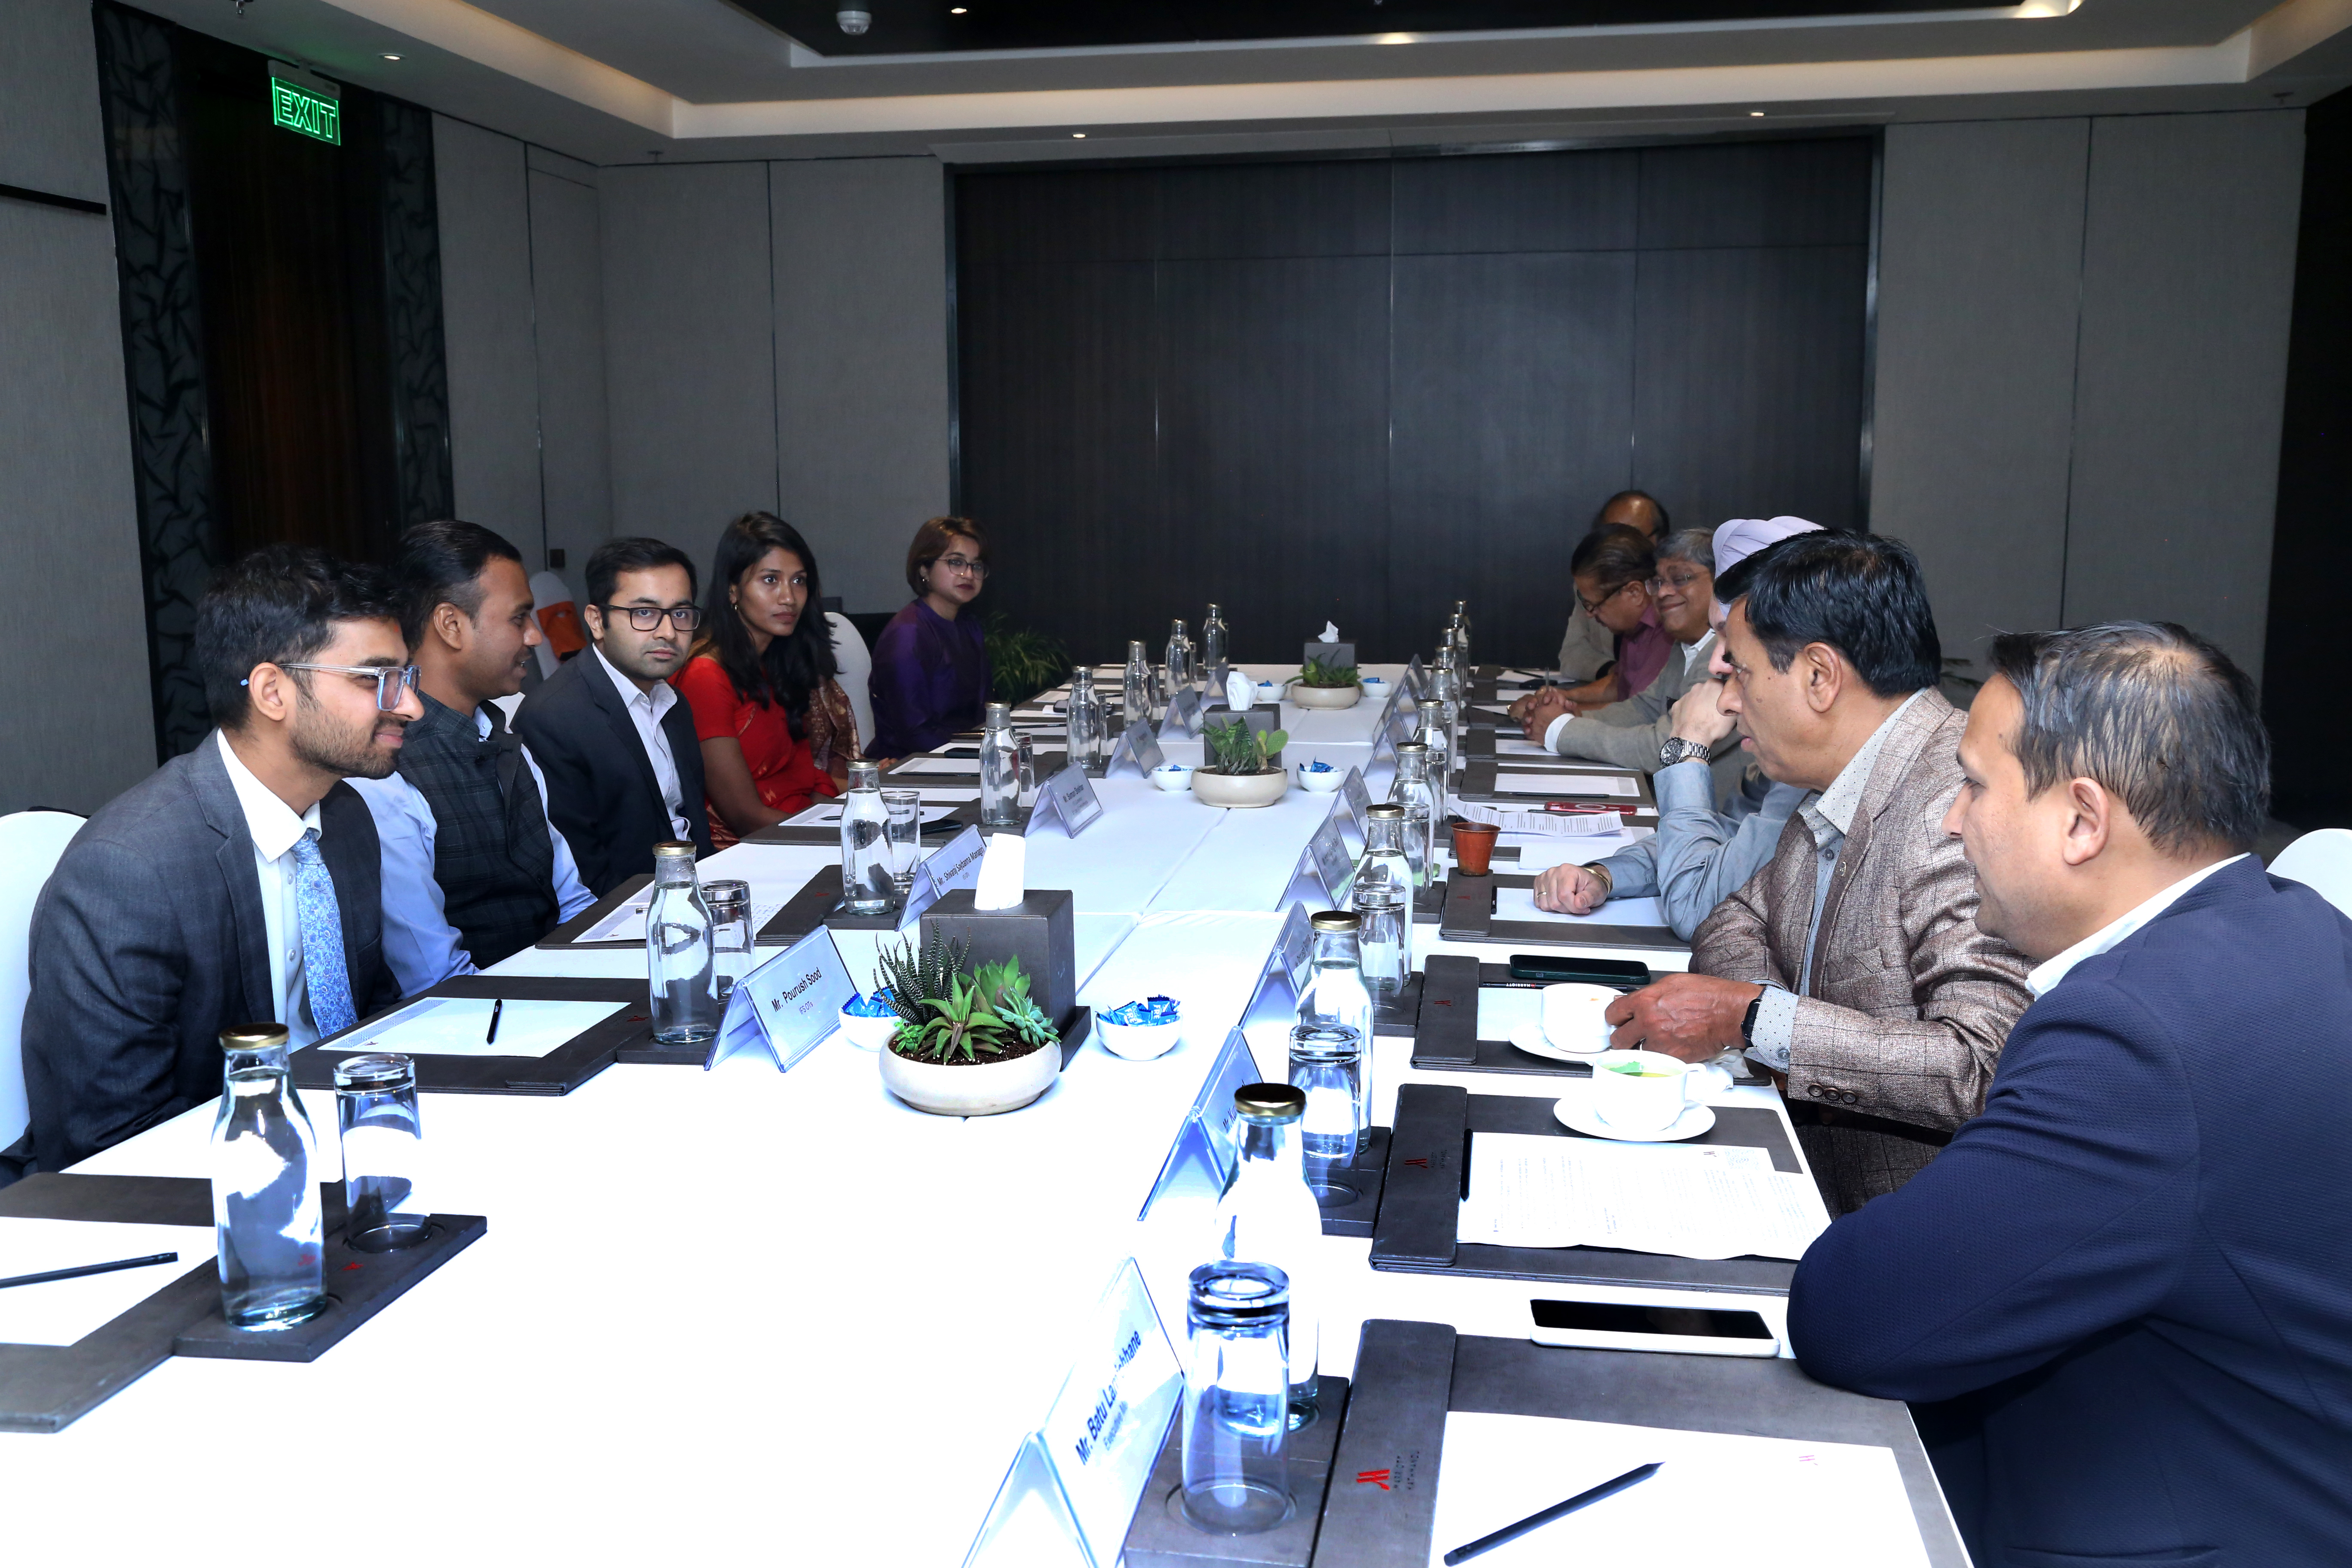 Interaction with Young Indian Diplomats (IFS Probationers)